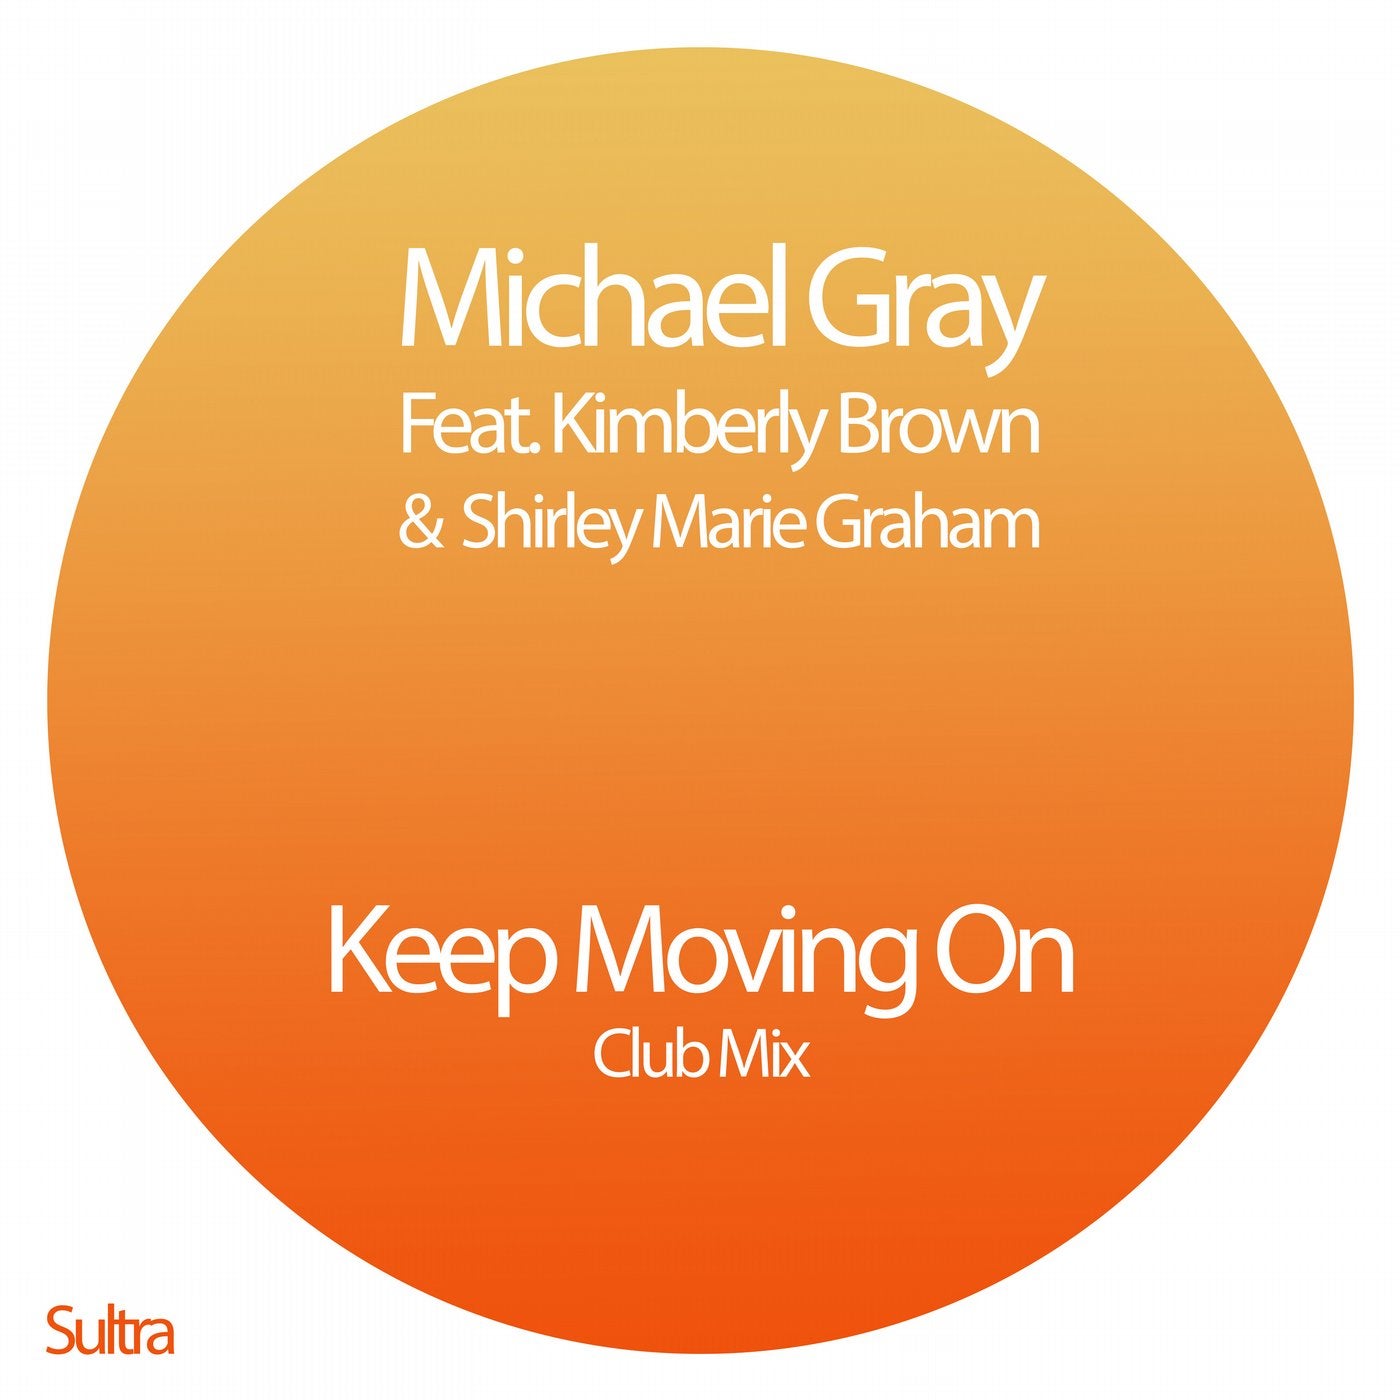 Keep Moving On - Club Mix